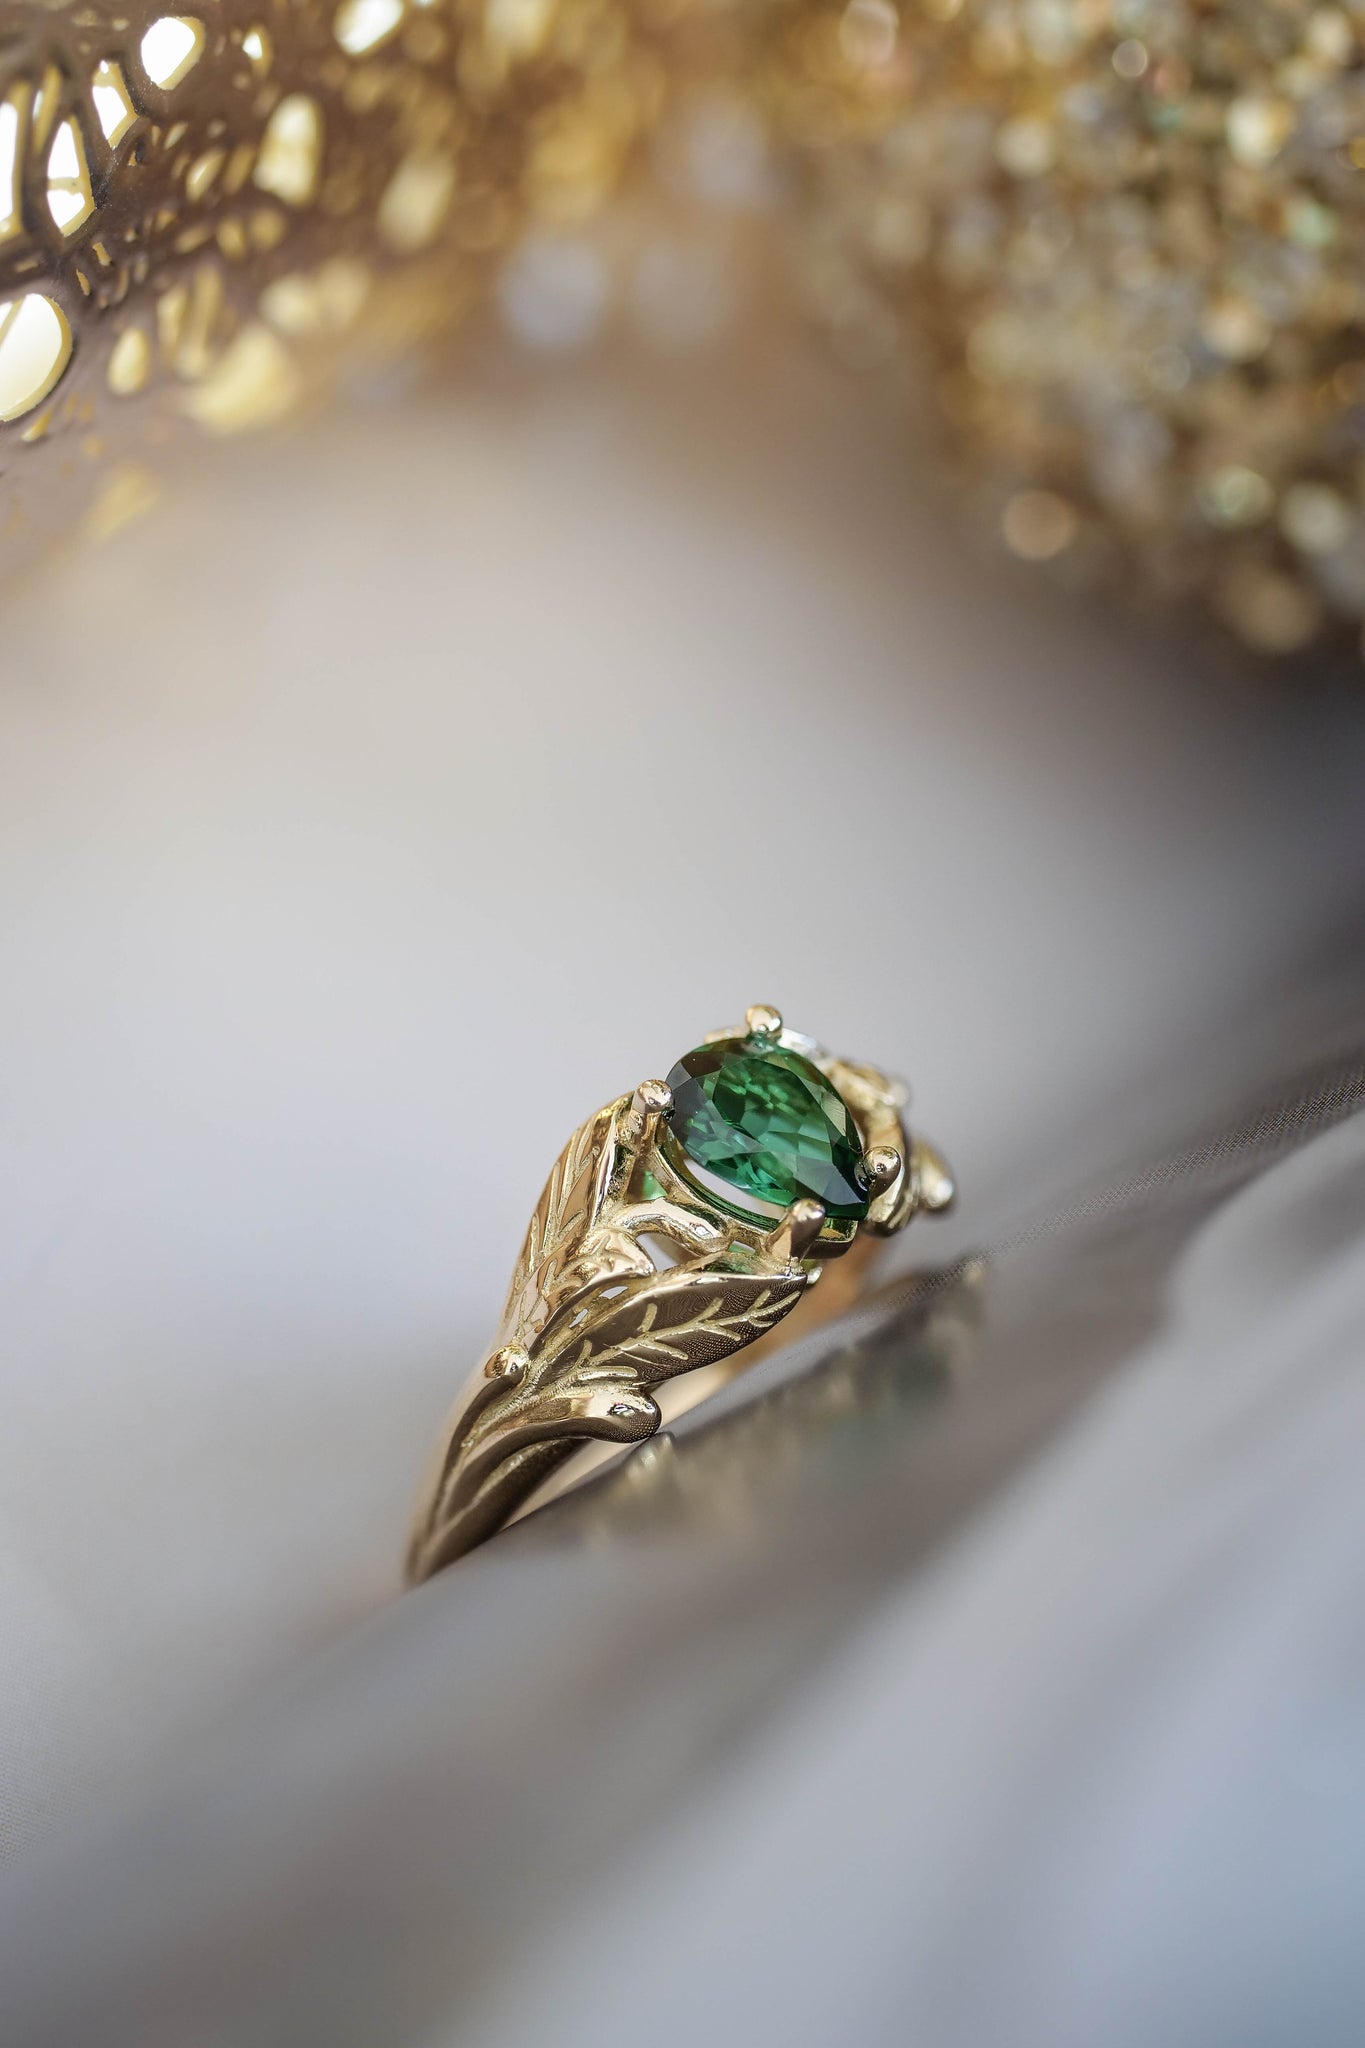 Gold leaf engagement ring with green tourmaline / Wisteria - Eden Garden Jewelry™